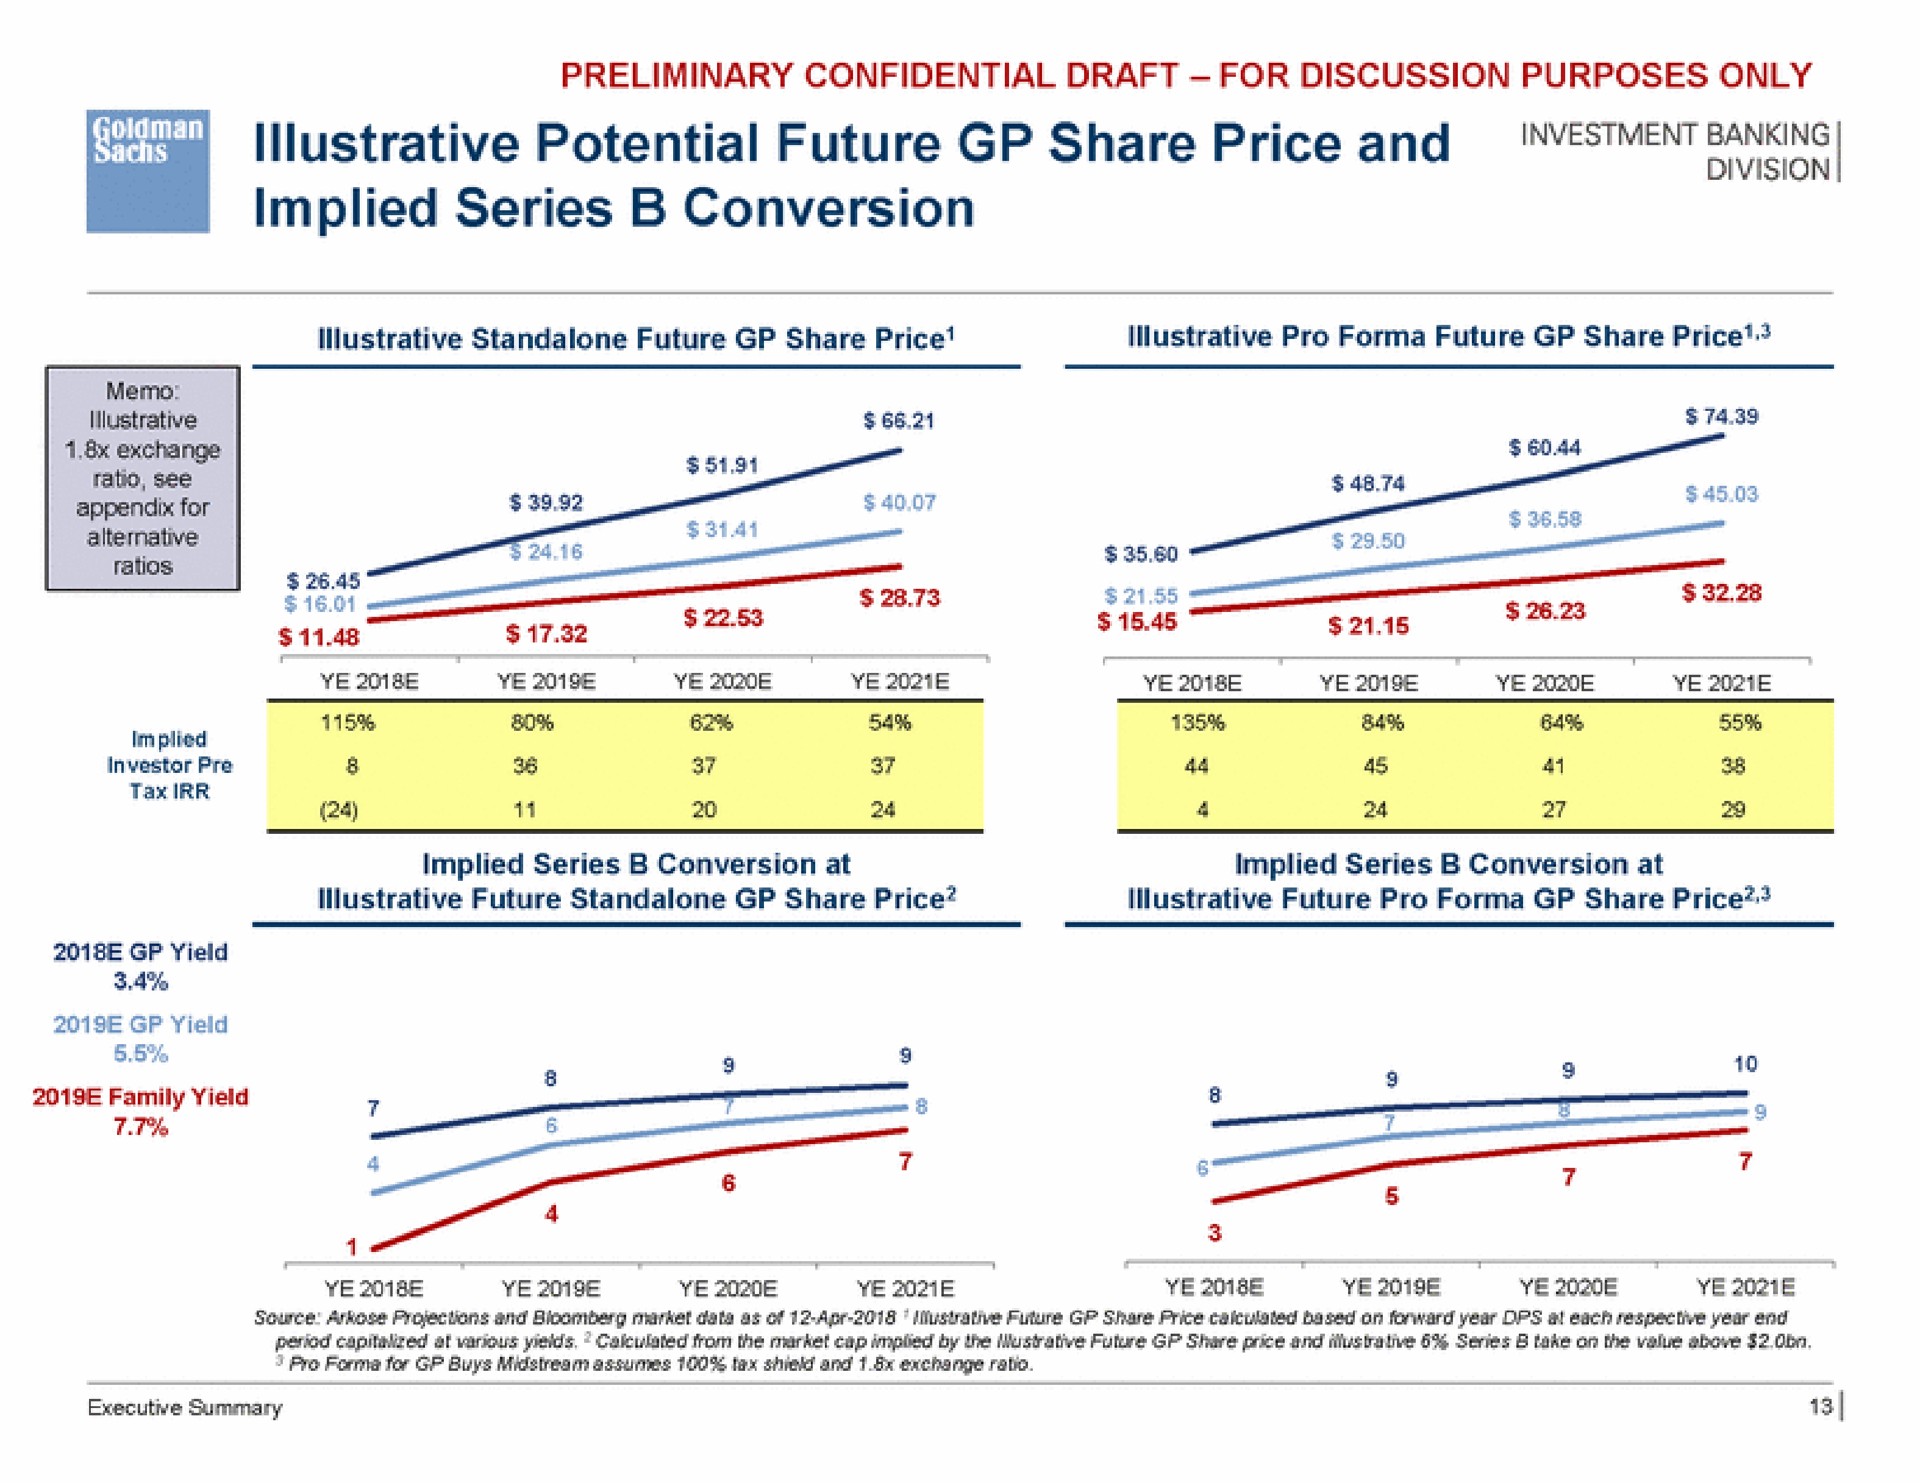 banking illustrative potential future share price and implied series conversion | Goldman Sachs